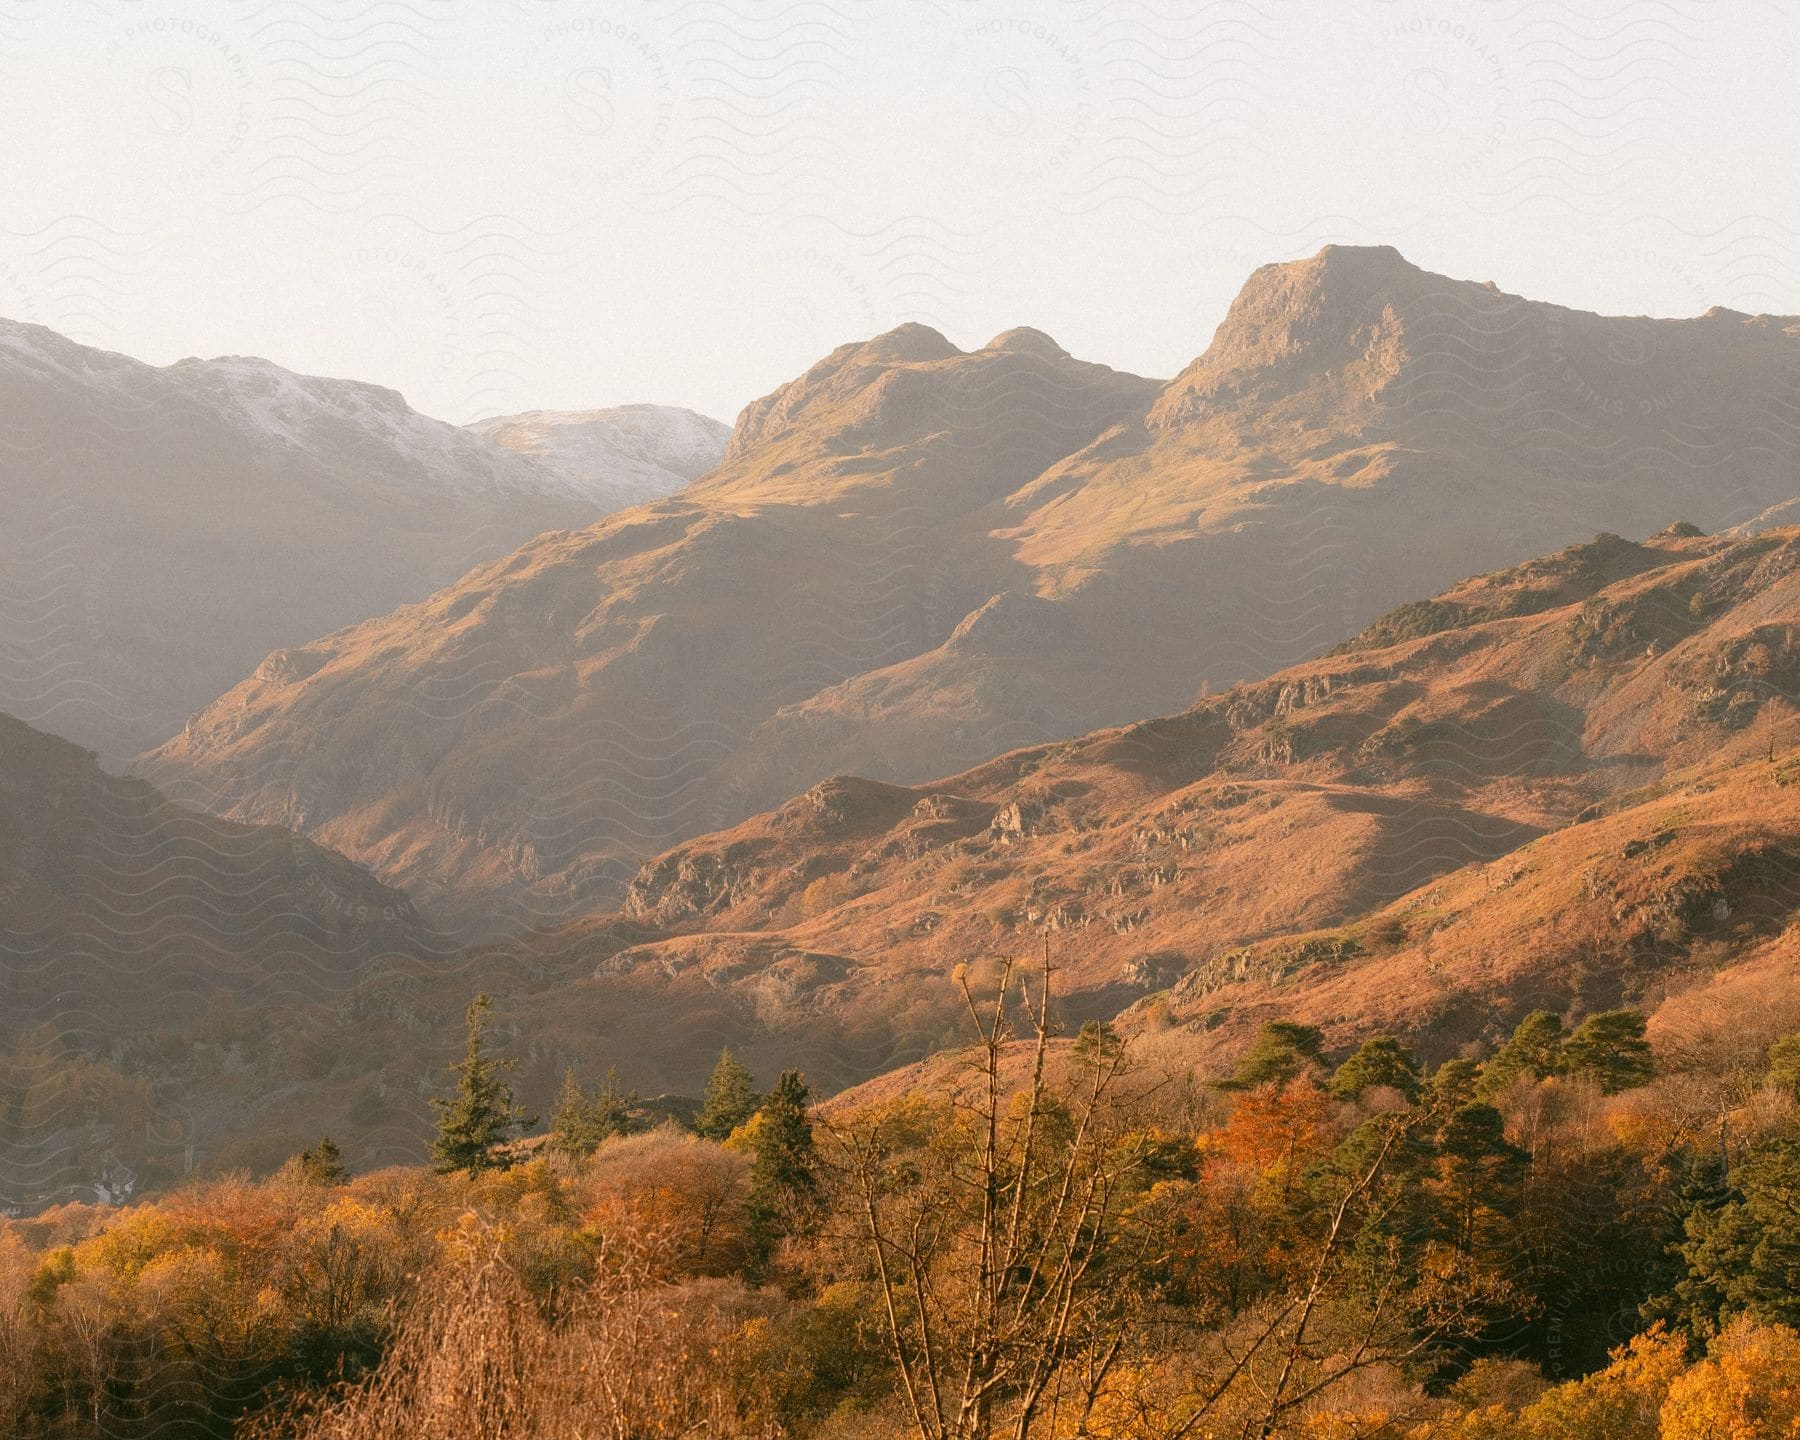 Rolling hills and a rugged mountain landscape, illuminating autumnal trees in the foreground.